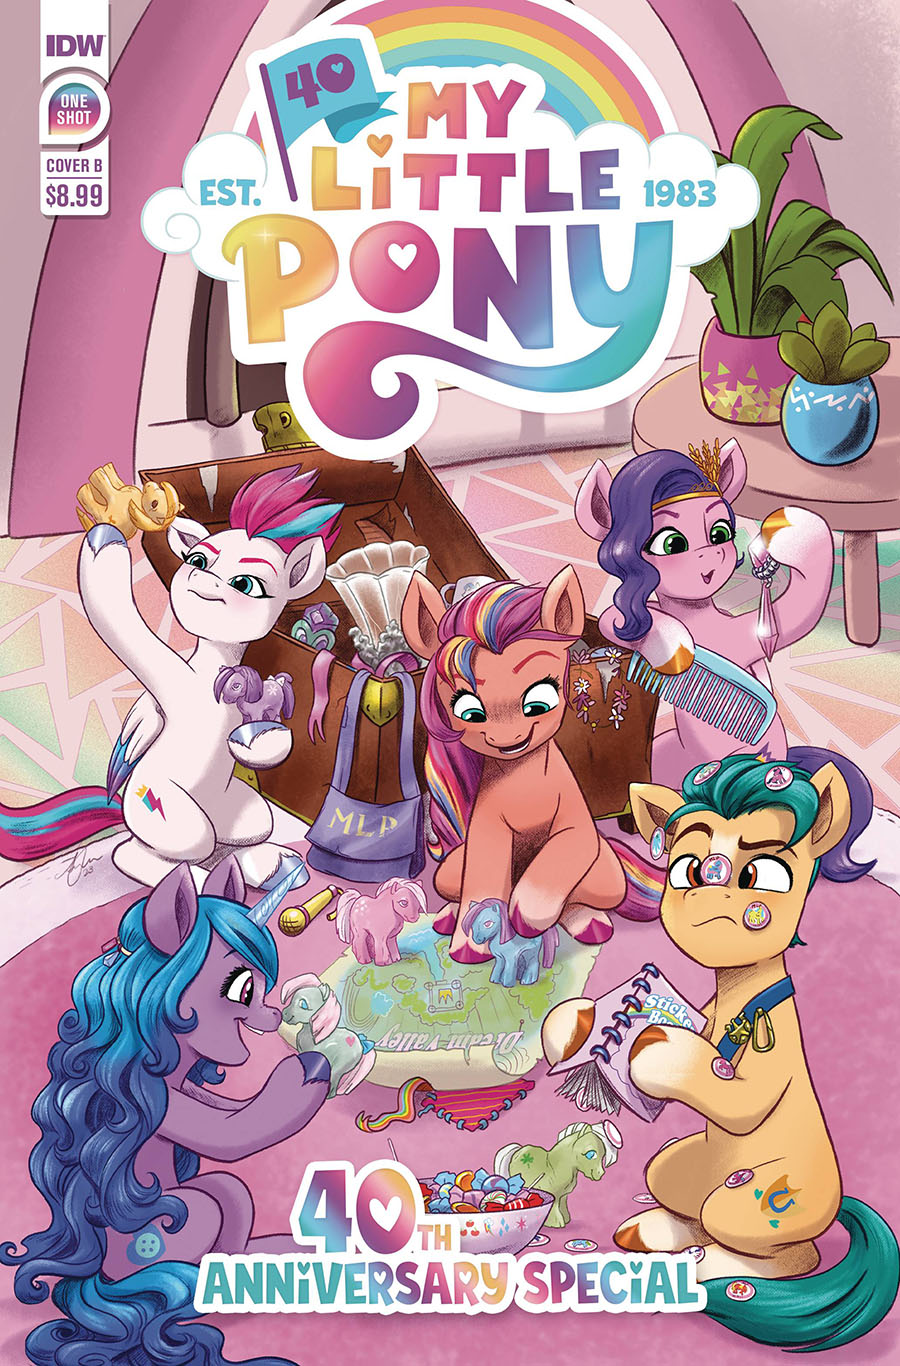 My Little Pony 40th Anniversary Special #1 (One Shot) Cover B Variant Amy Mebberson Cover